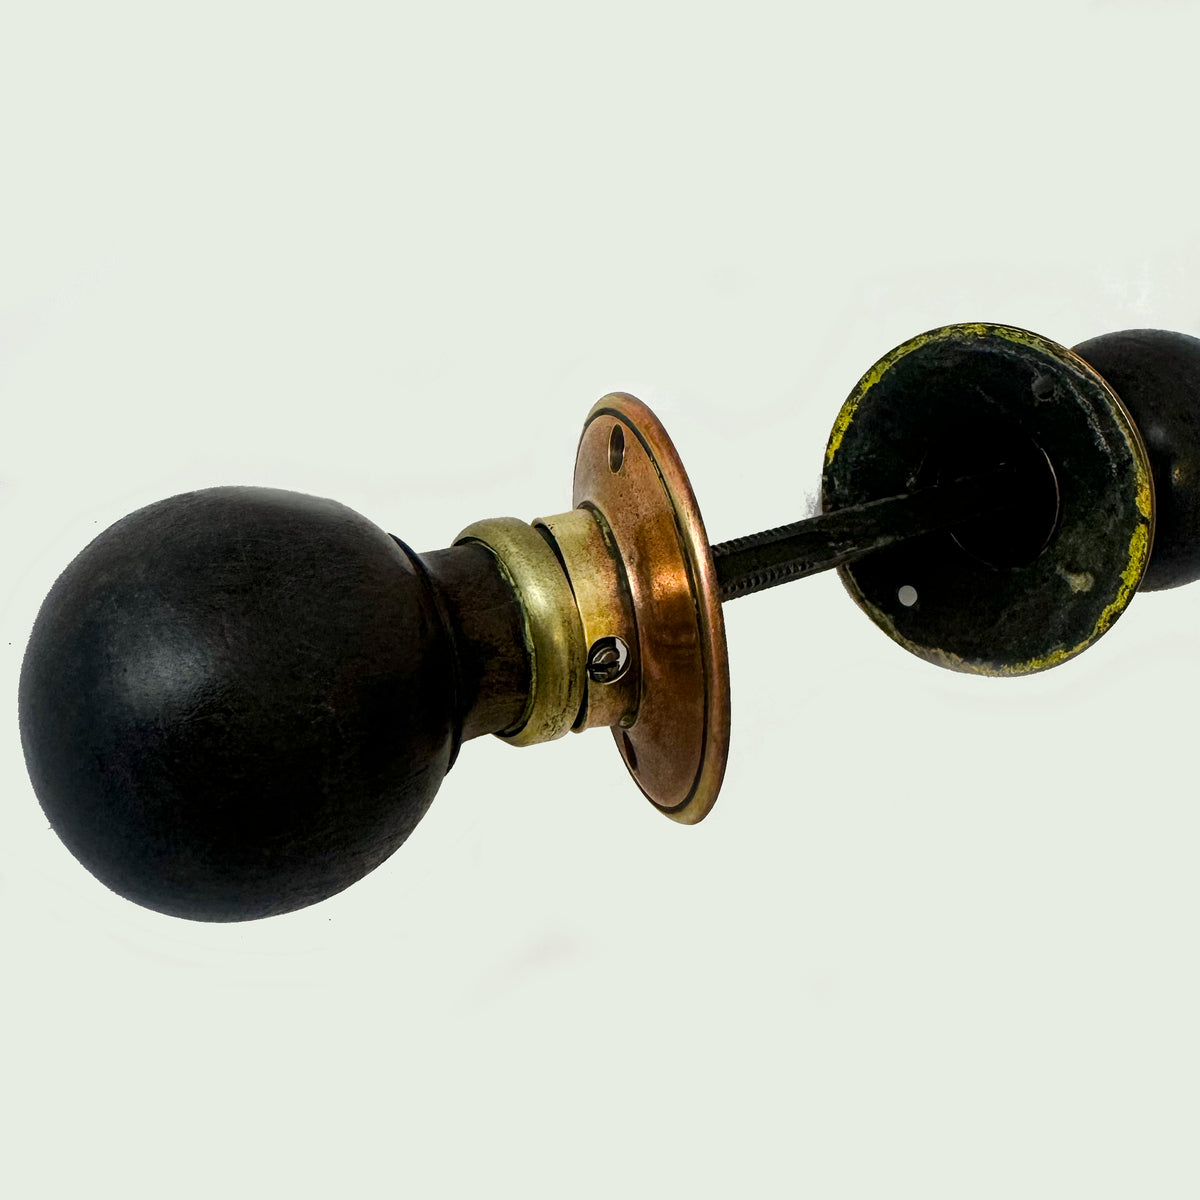 Antique Round Ebony Door Knobs | 2 Pairs Available | The Architectural Forum